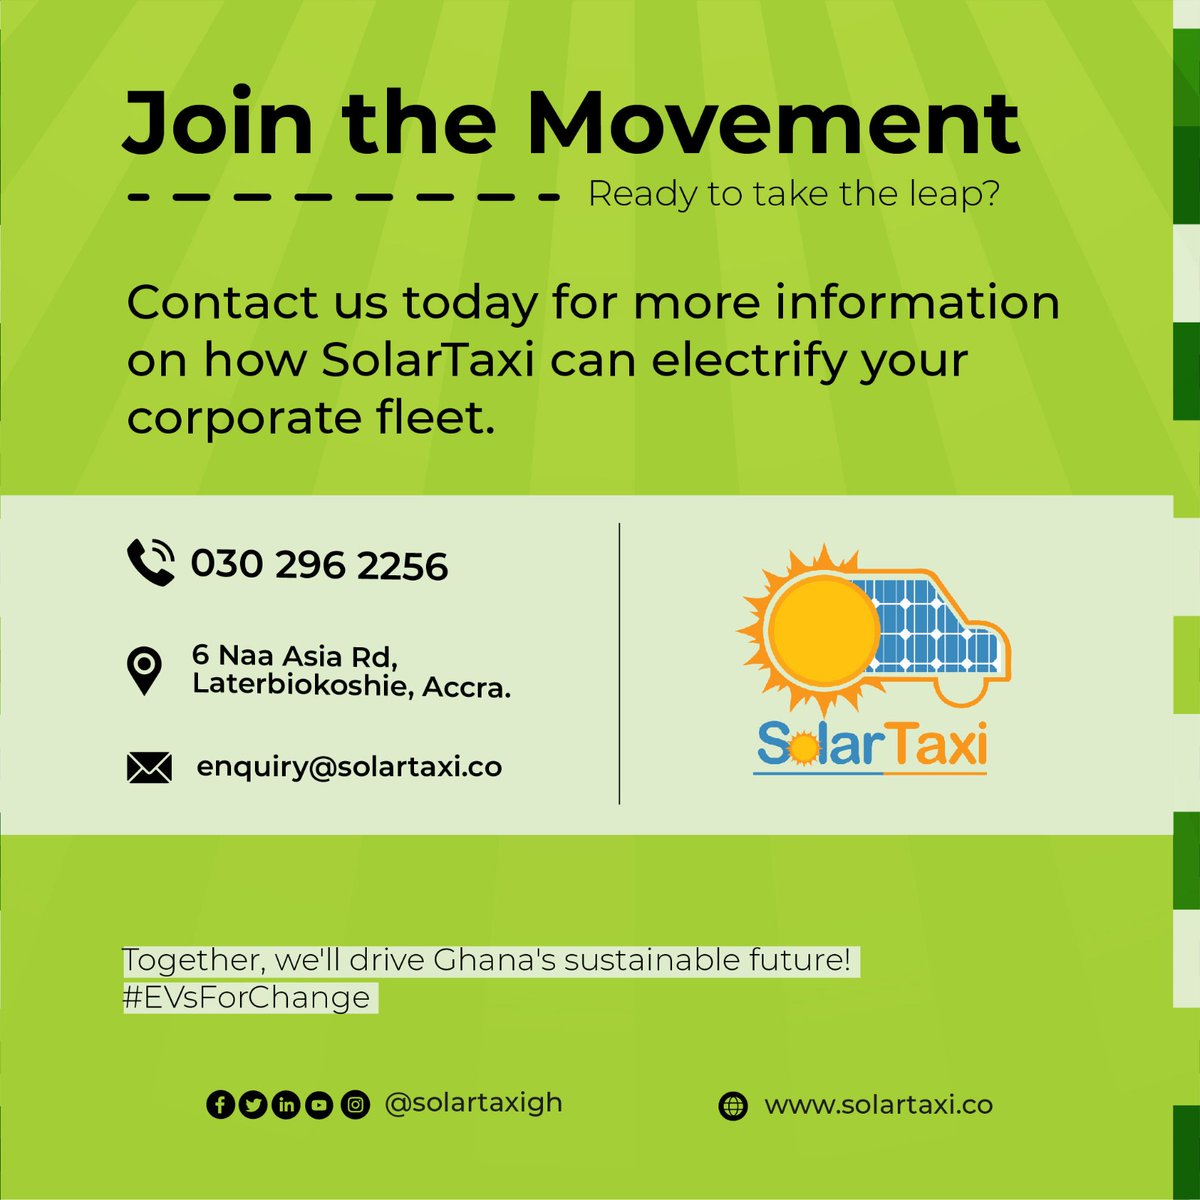 Did you know that 80% of Ghana’s Corporate Leaders believe that EVs are viable options for corporate fleets in Ghana?

Make The Switch  and Go Electric today!!

.
.
. 

#solartaxi #solartaxigh #ev #ecofriendly #gogreen